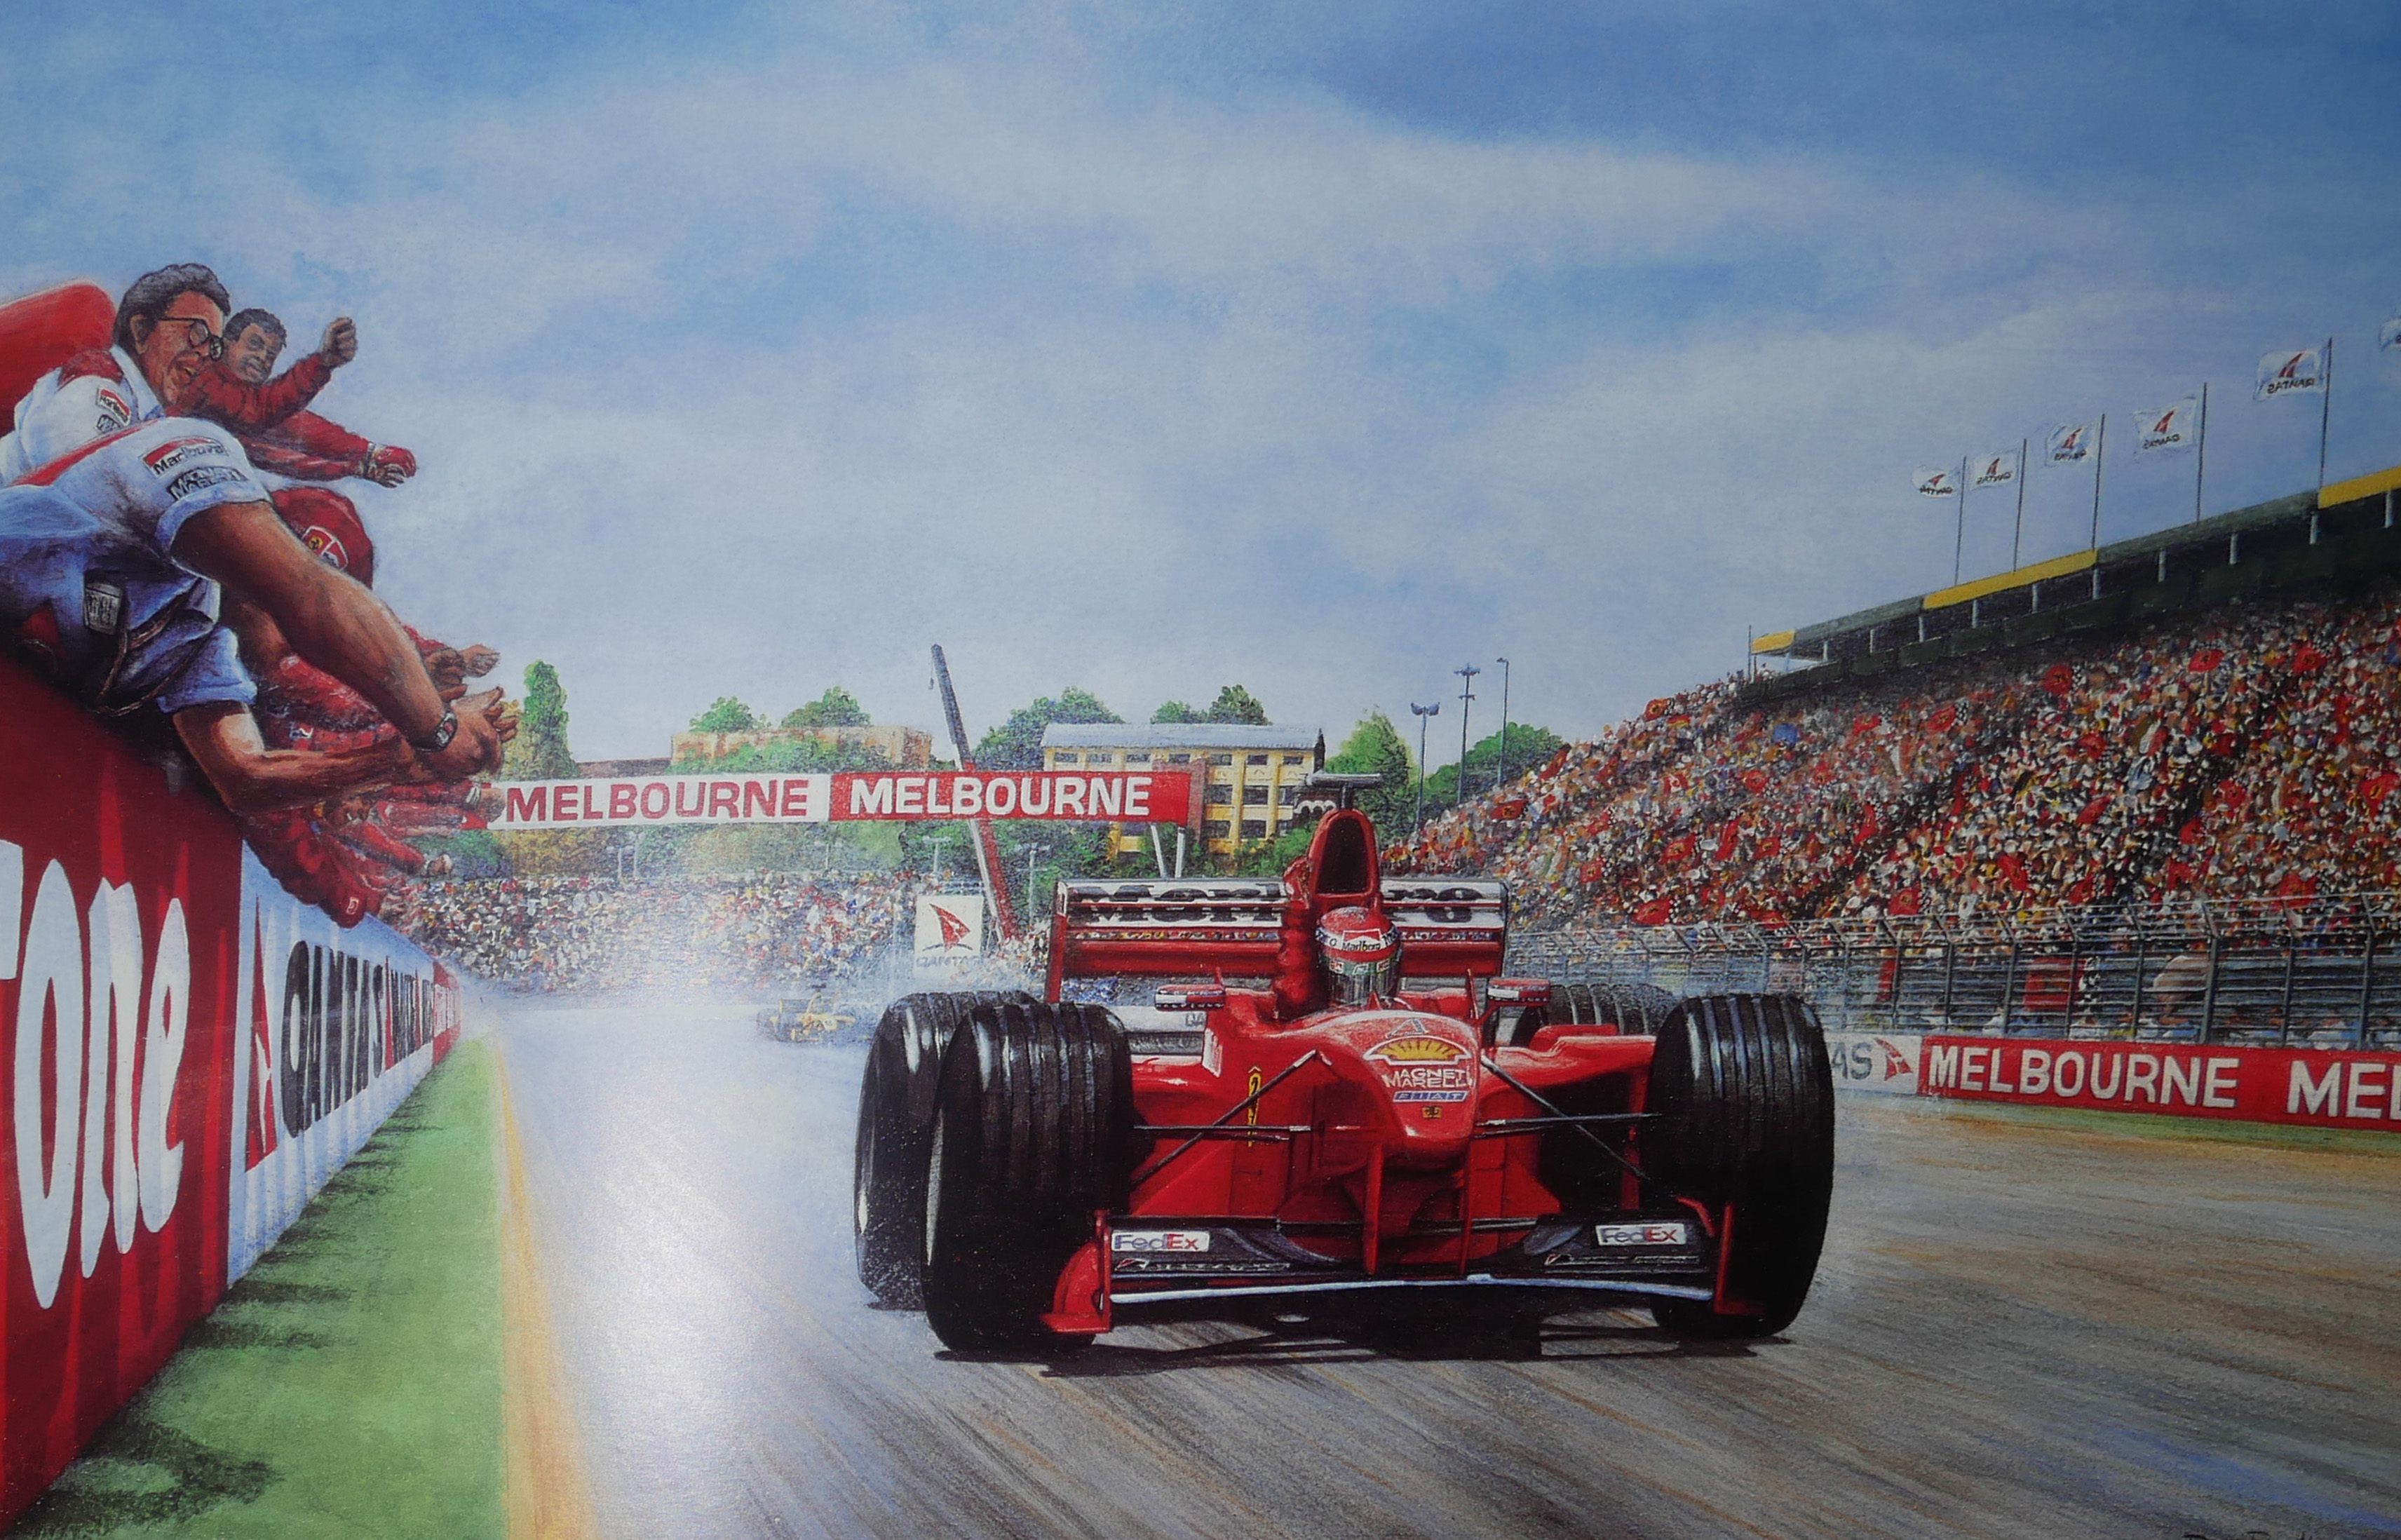 FORMULA 1 GRAND PRIX RACING CAR INTEREST, A LARGE COLLECTION OF LIMITED EDITION, SIGNED AND NUMBERED